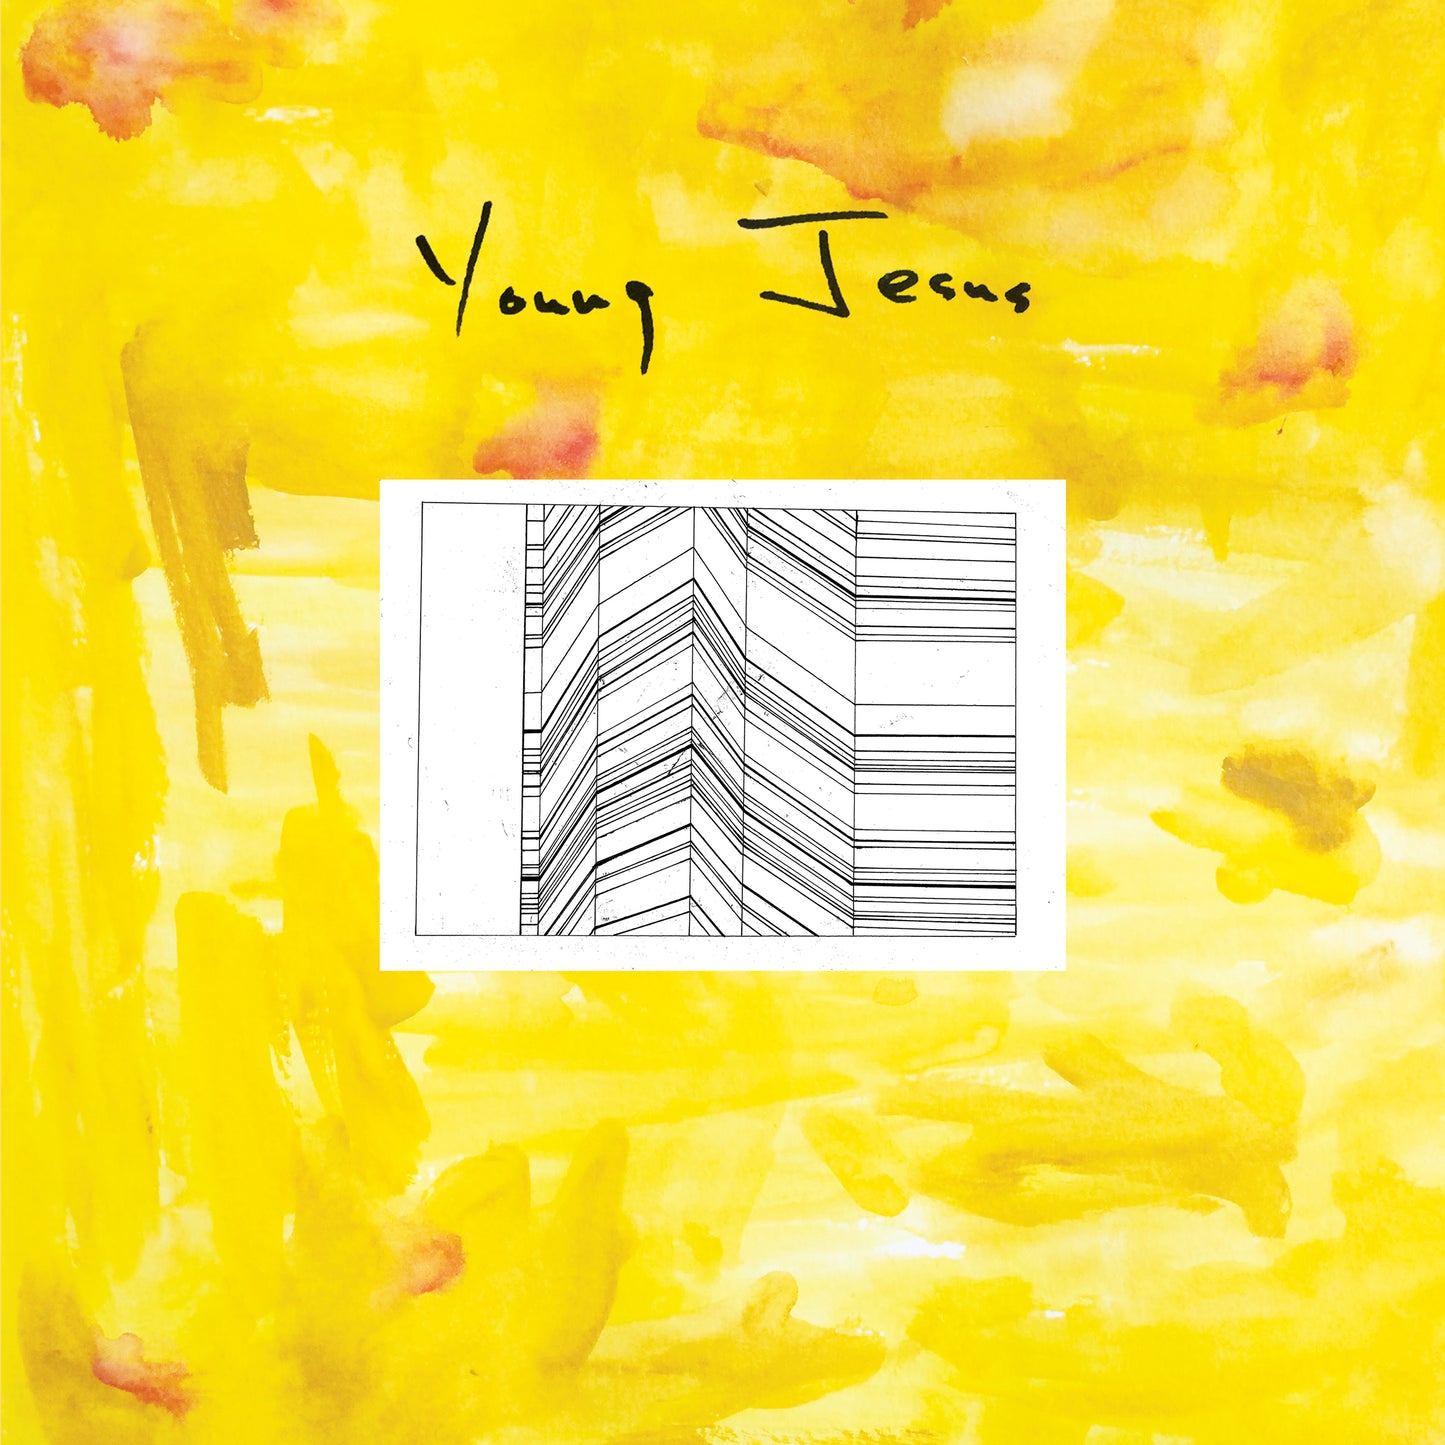 Young Jesus - The Whole Thing Is Just There (Vinyl)